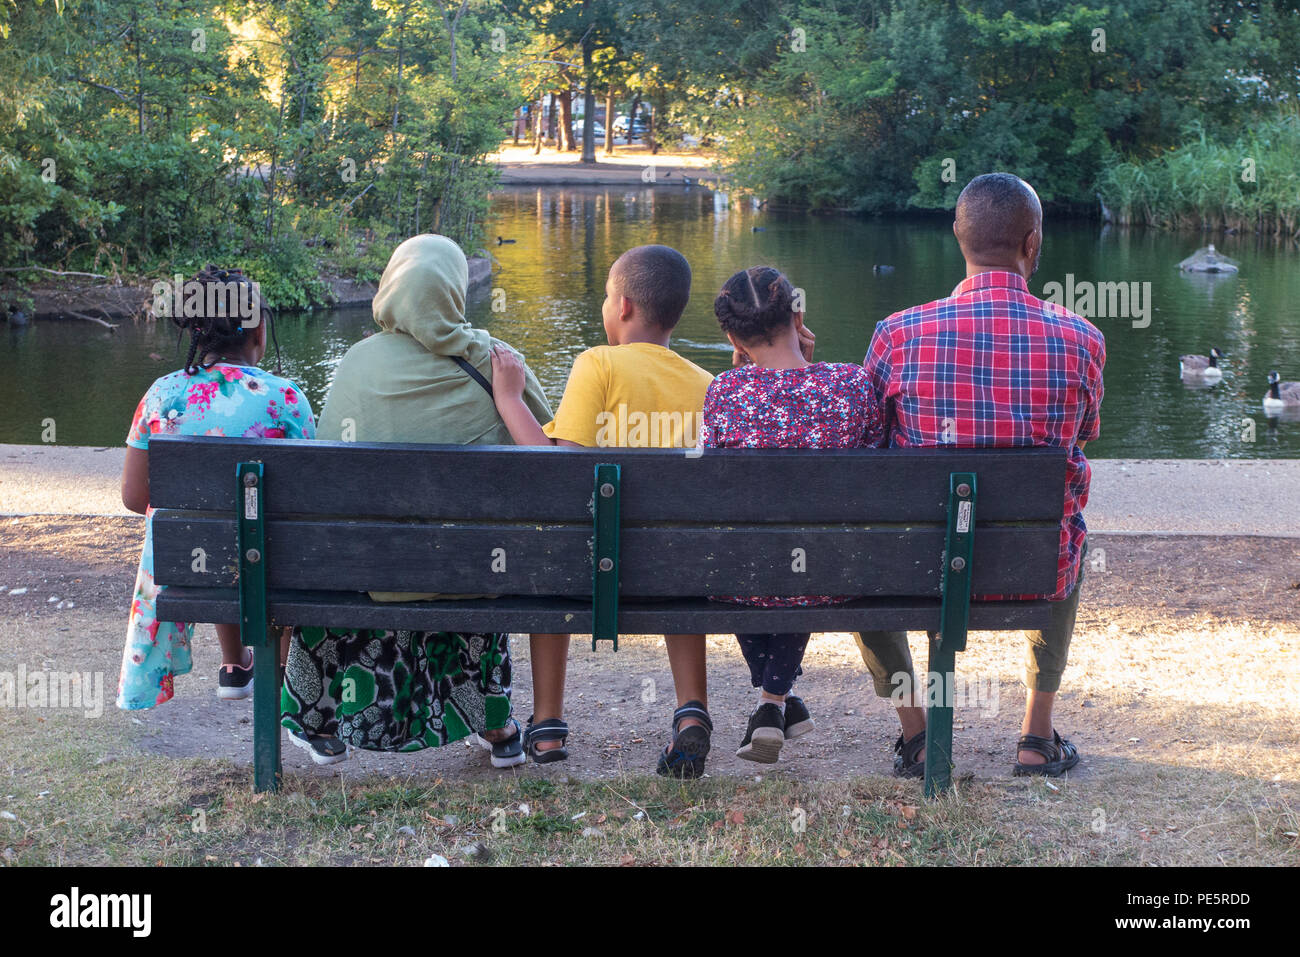 A muslim family enjoy the evening sunshine on a park bench in a London park Stock Photo